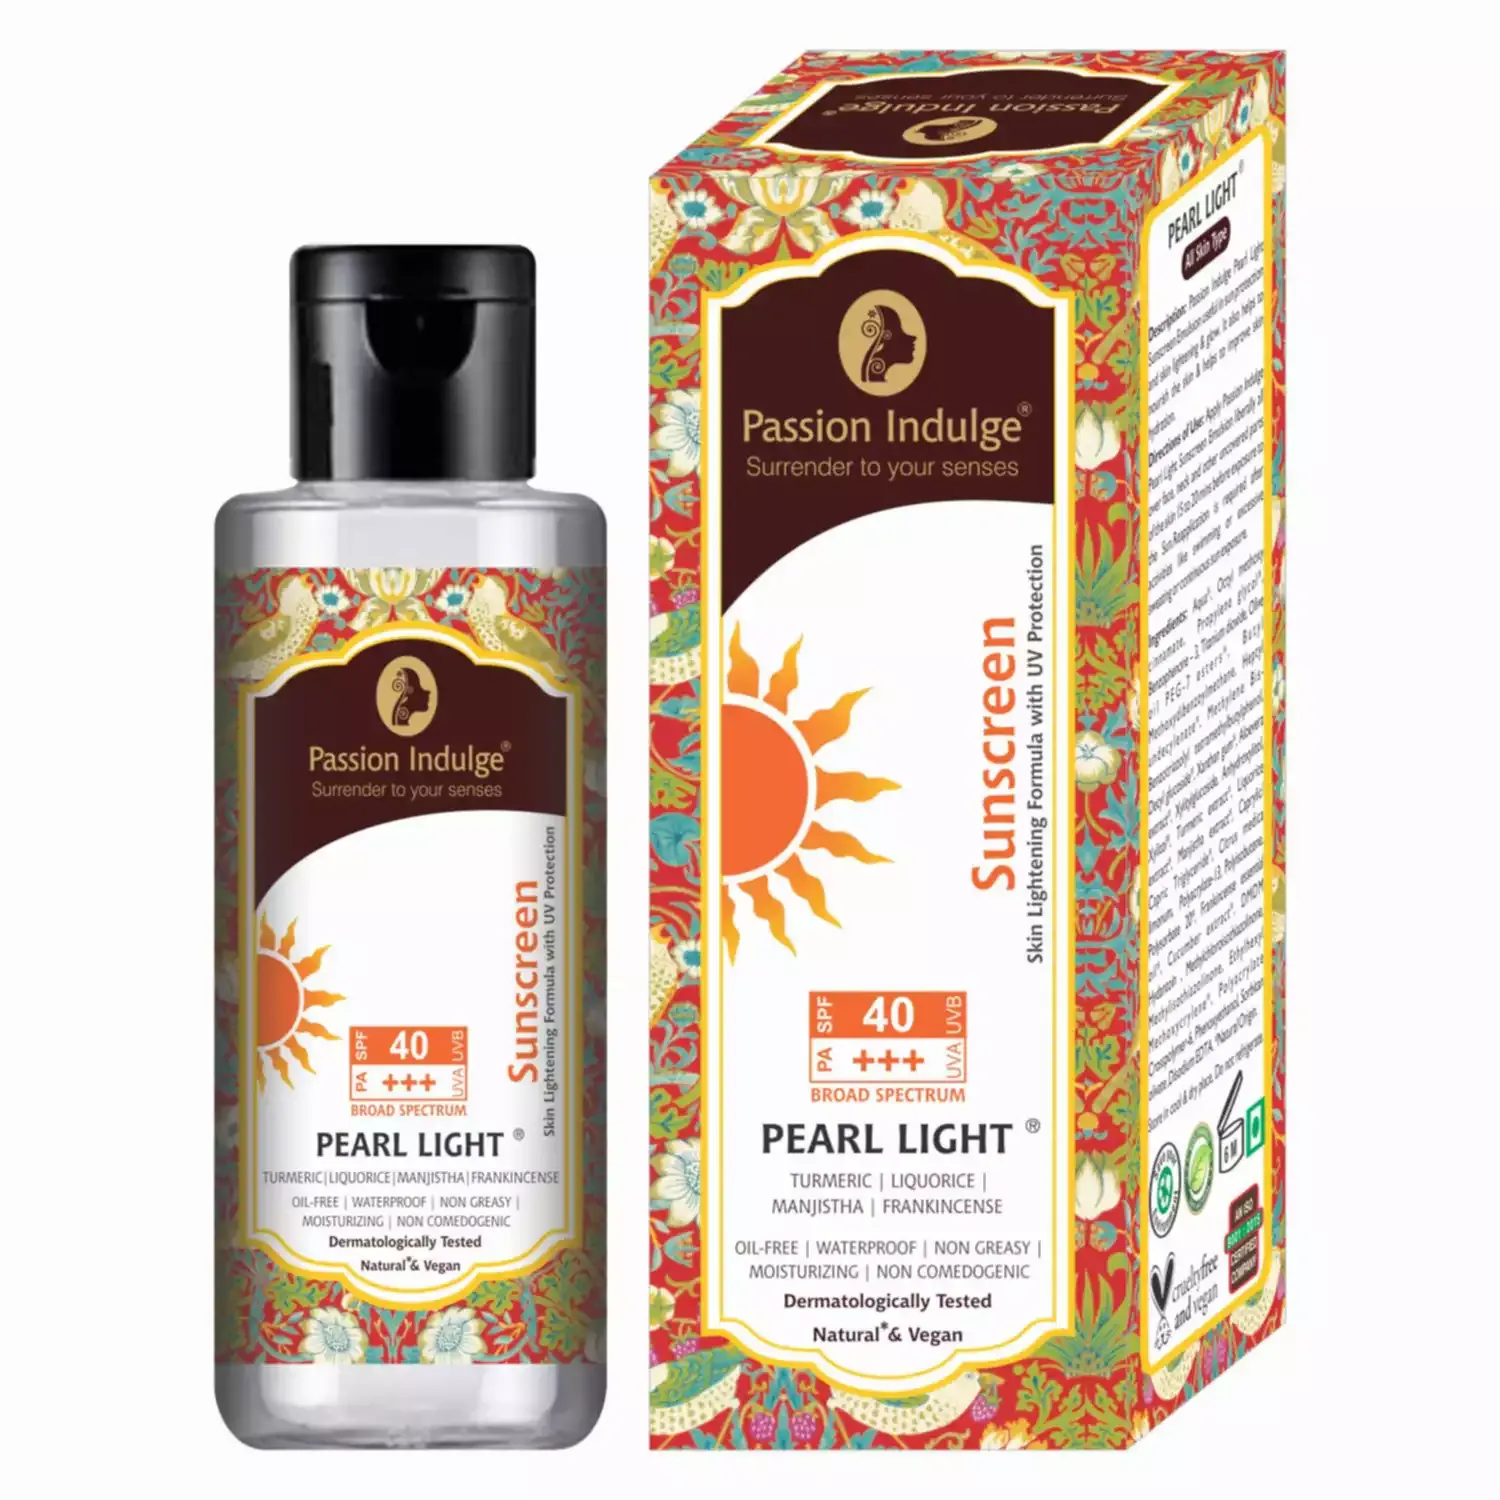 Passion Indulge Pearl Light Natural Sunscreen With Spf 40 For Face And Body UV Protection - 100gm